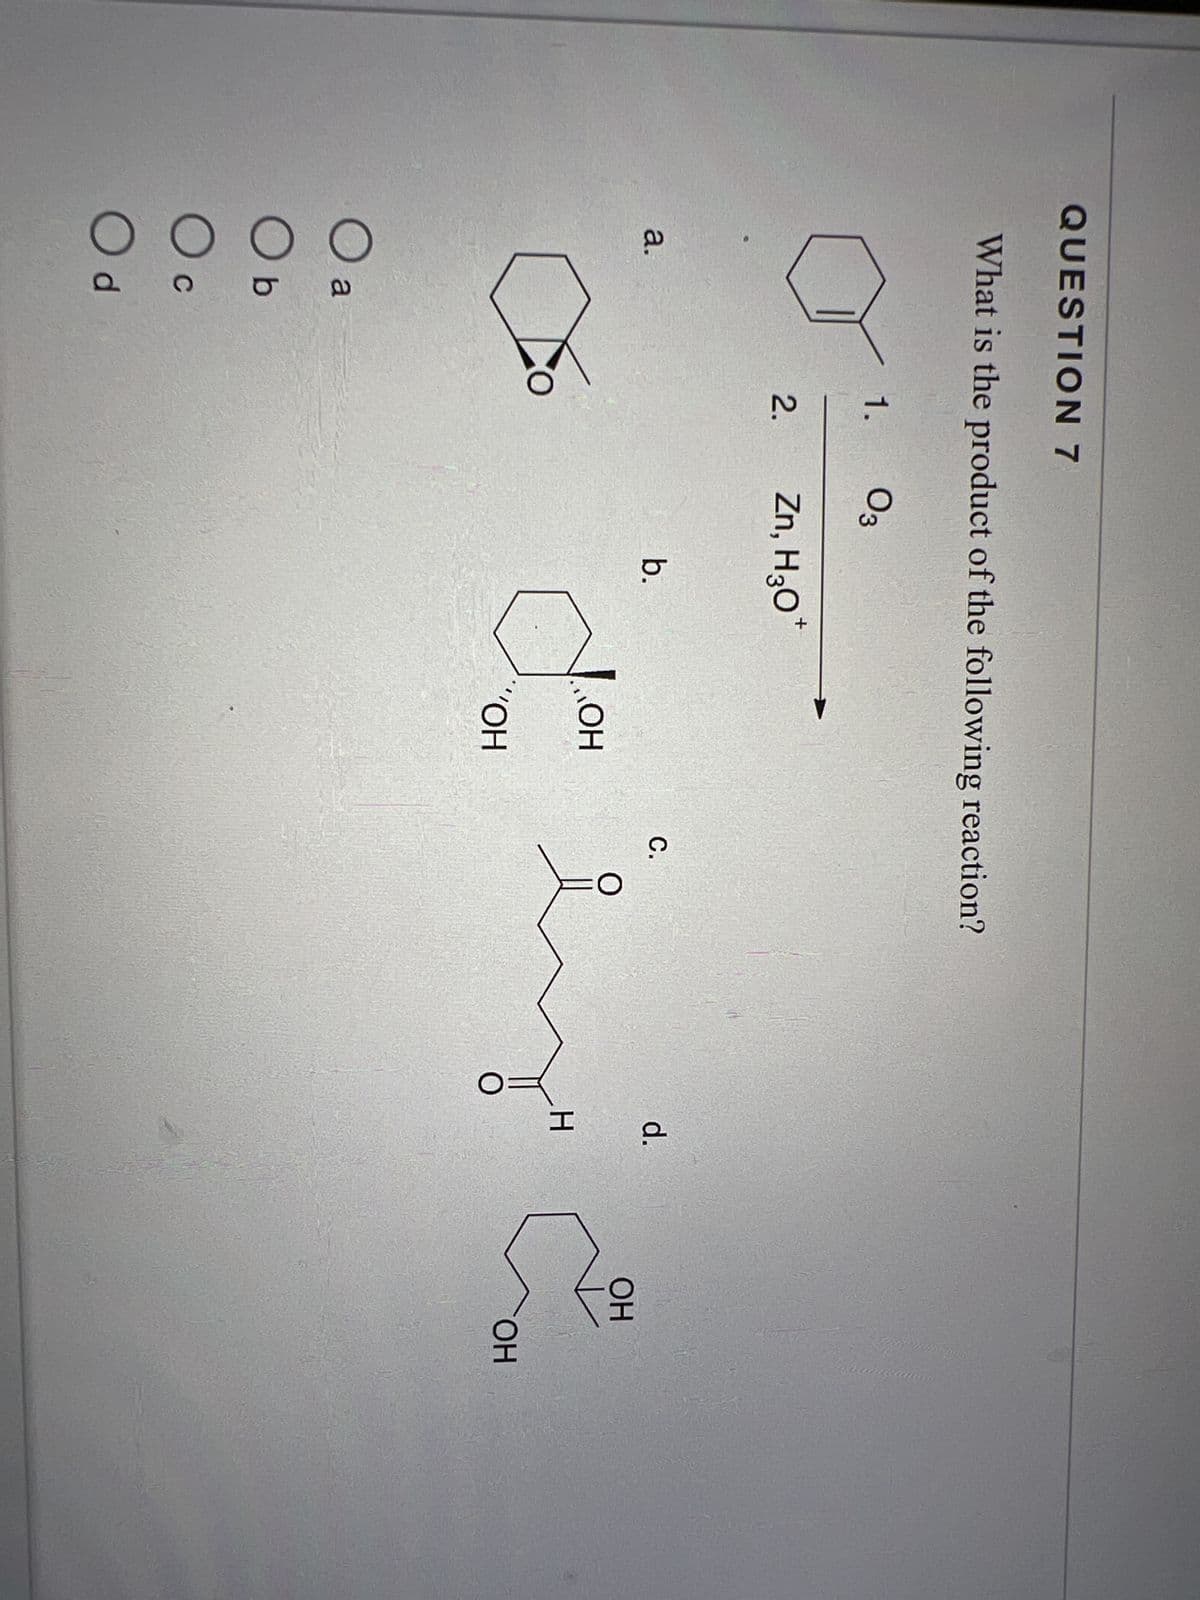 QUESTION 7
What is the product of the following reaction?
a.
O a
Ob
O c
Od
1.
2.
Fo
03
+
Zn, H₂O*
b.
do
OH
„OH
C.
d.
H
OH
OH